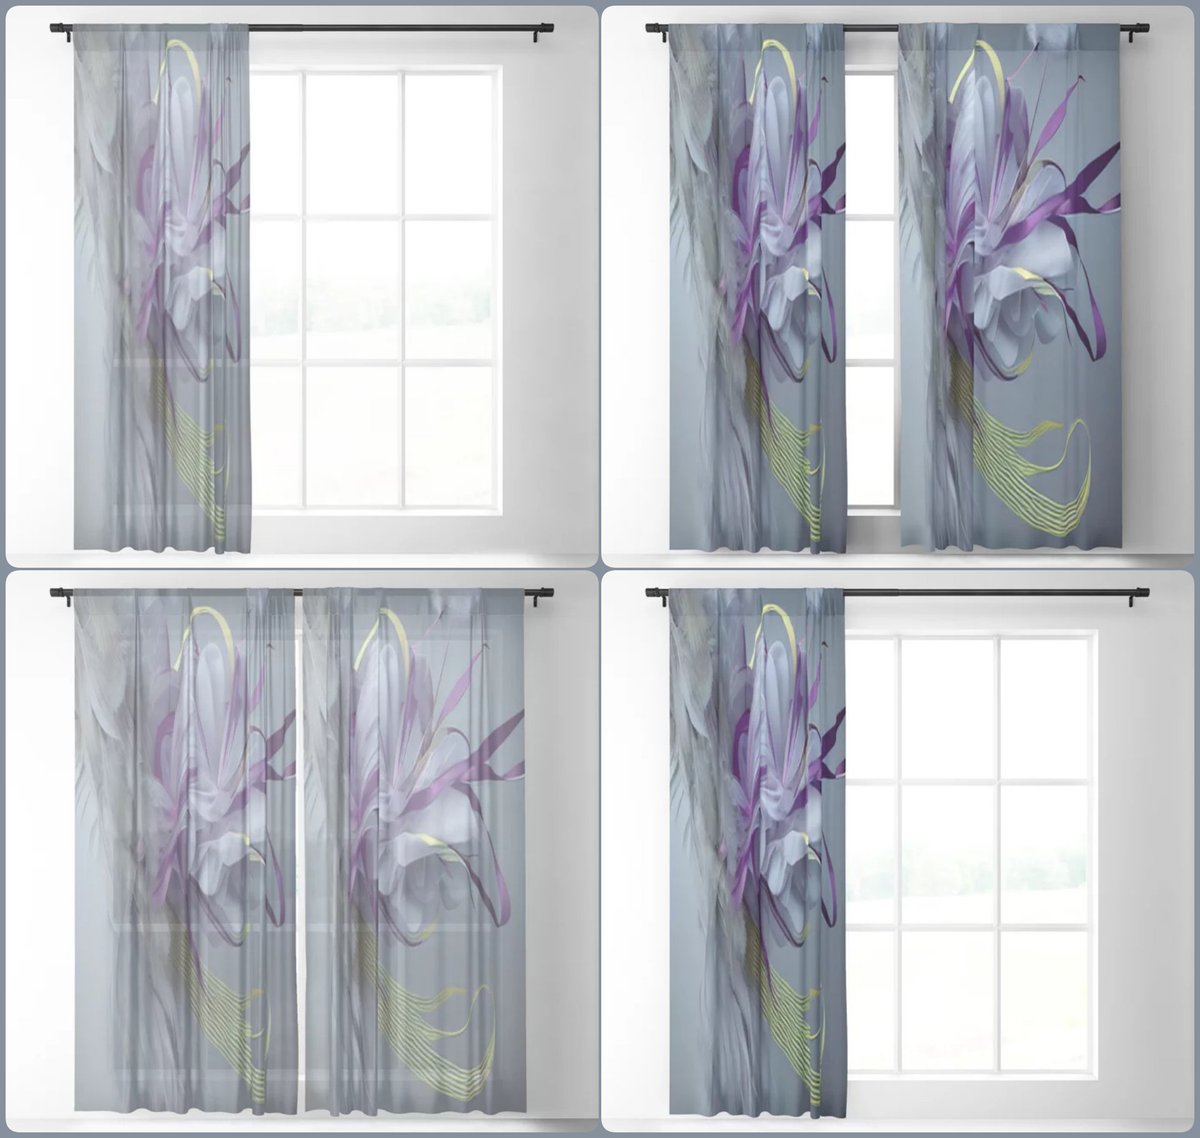 Silent Eden Sheer & Blackout Curtain~by Art Falaxy
~Exquisite Decor~ #artfalaxy #art #curtains #drapes #homedecor #society6 #Society6max #swirls #accents #sheercurtains #windowtreatments #blackoutcurtains #floorrugs

society6.com/product/silent…